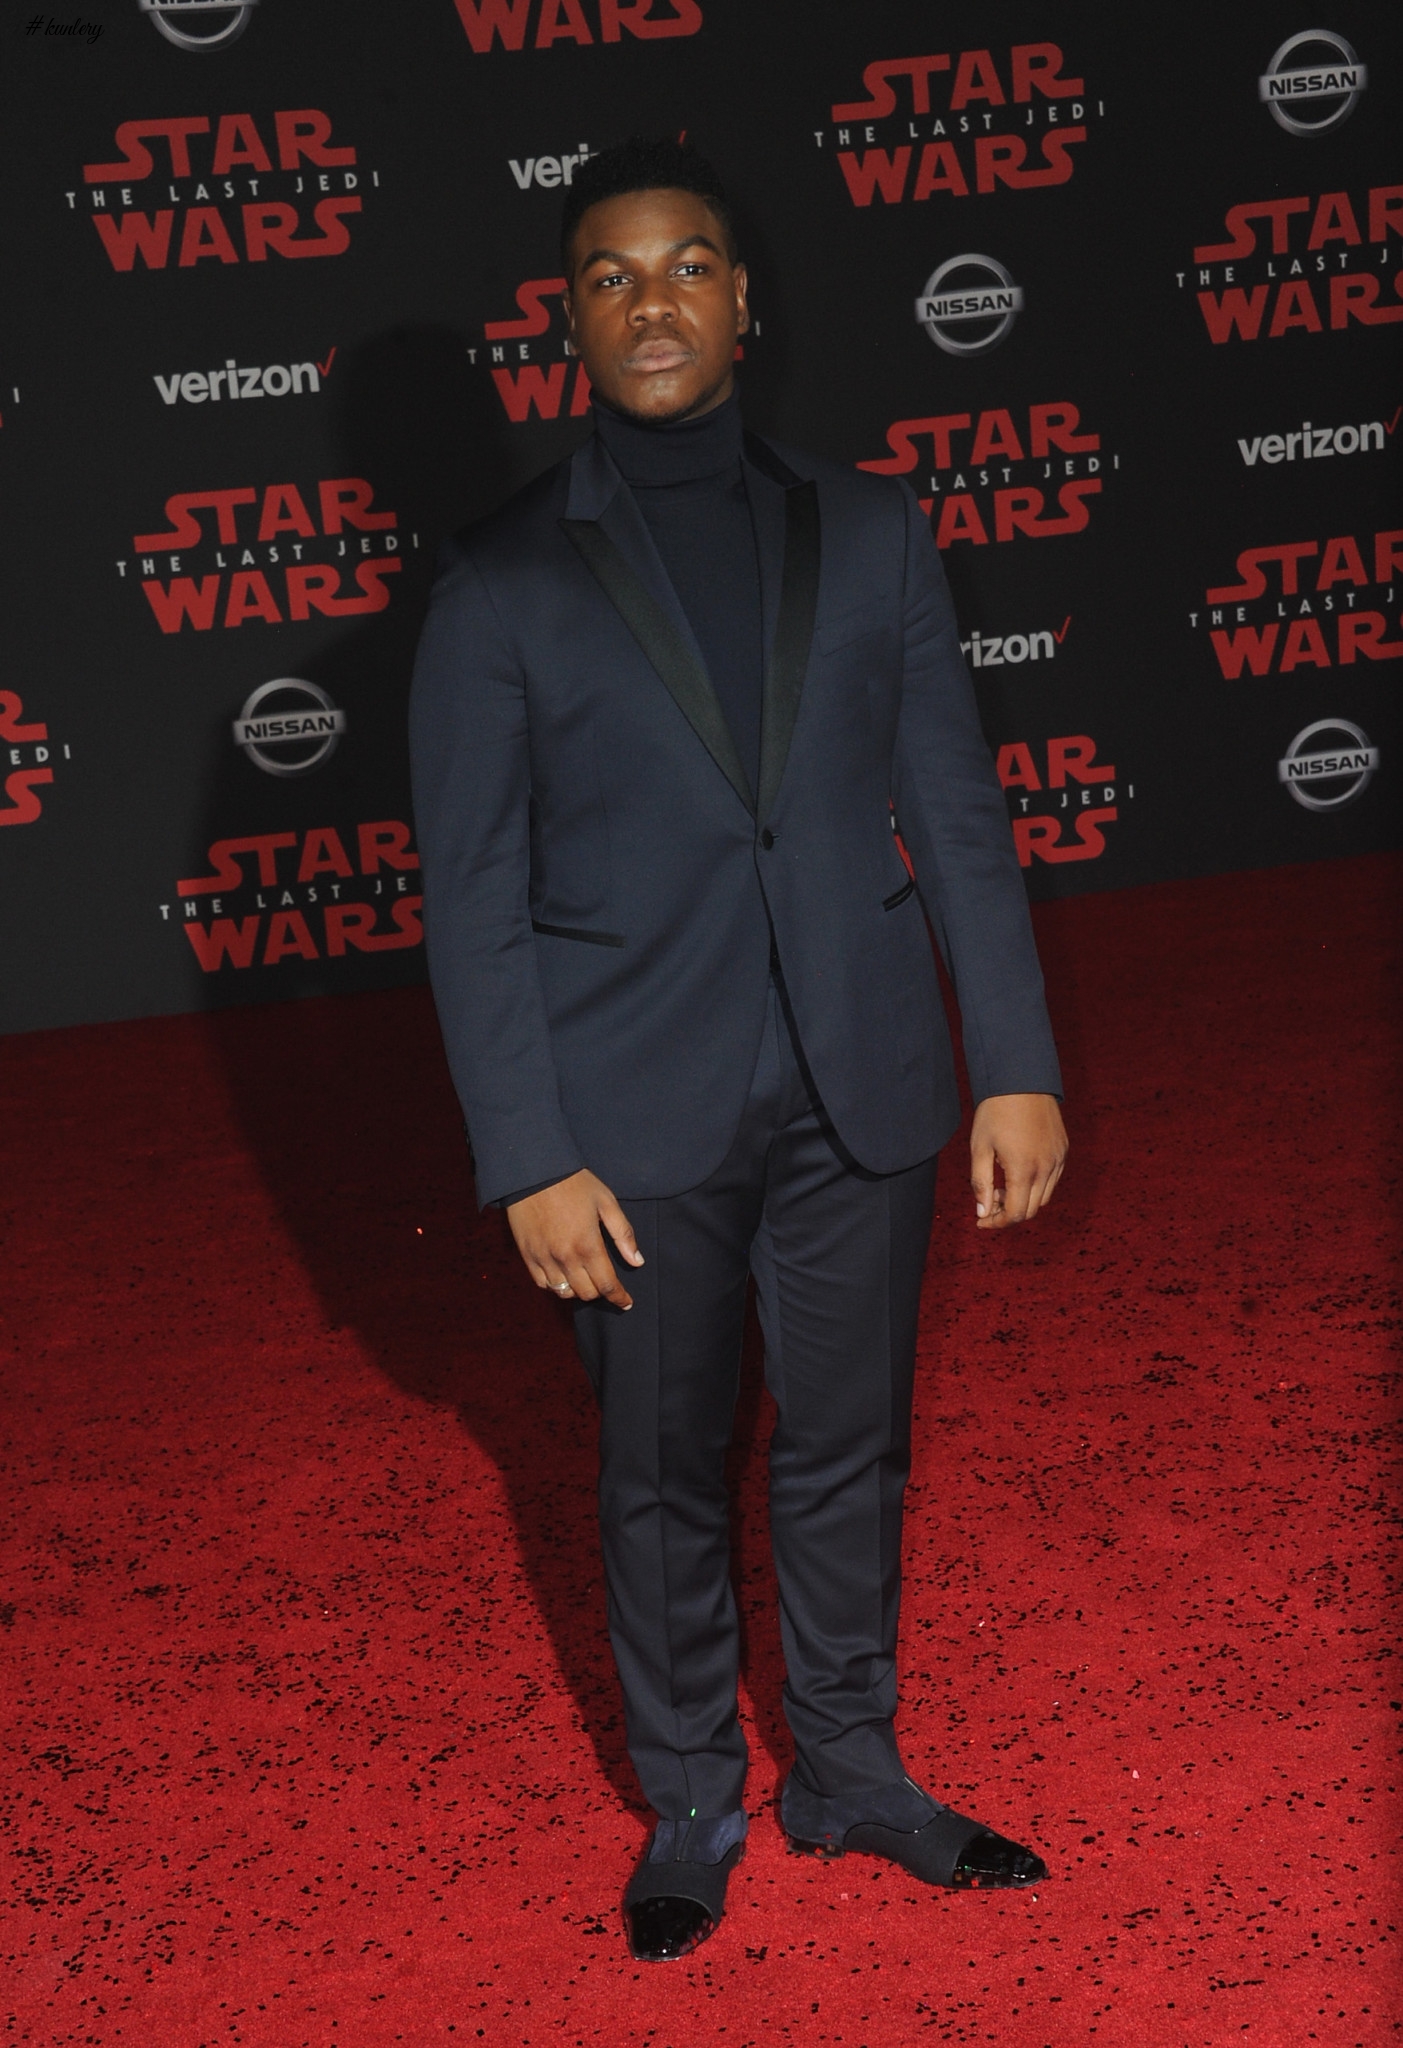 Lupita Nyong’o, John Boyega, More Attended The World Premiere Of “Star Wars: The Last Jedi”